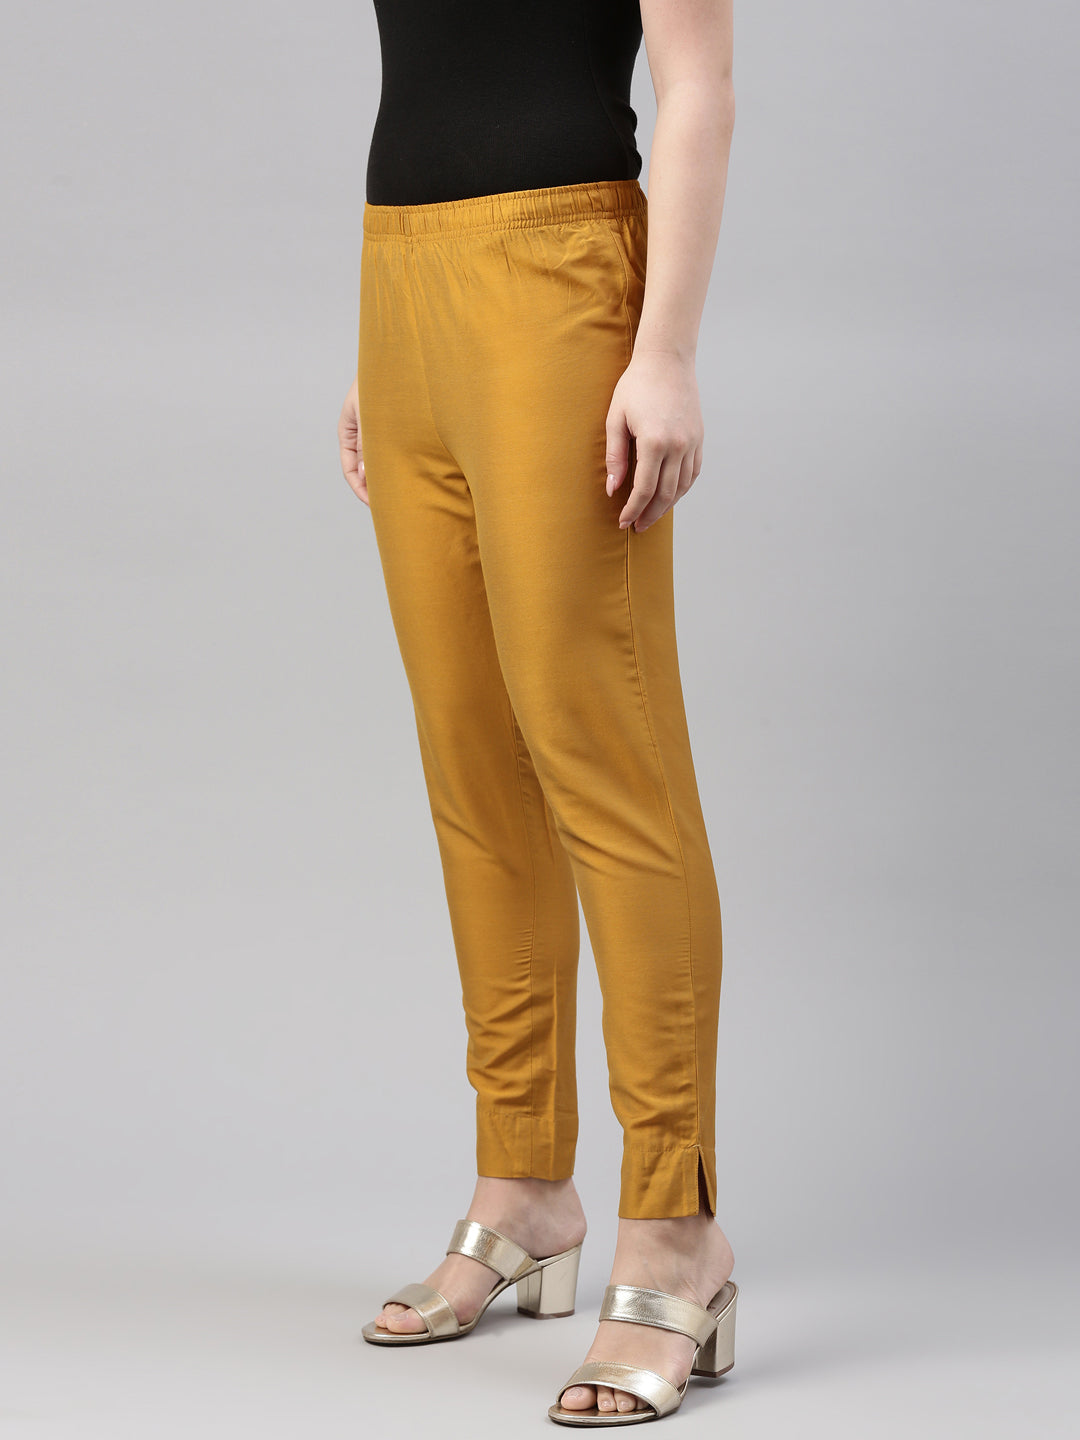 GO COLORS Women's Tapered Fit Rayon Pants (8905344088245_Gold_L)